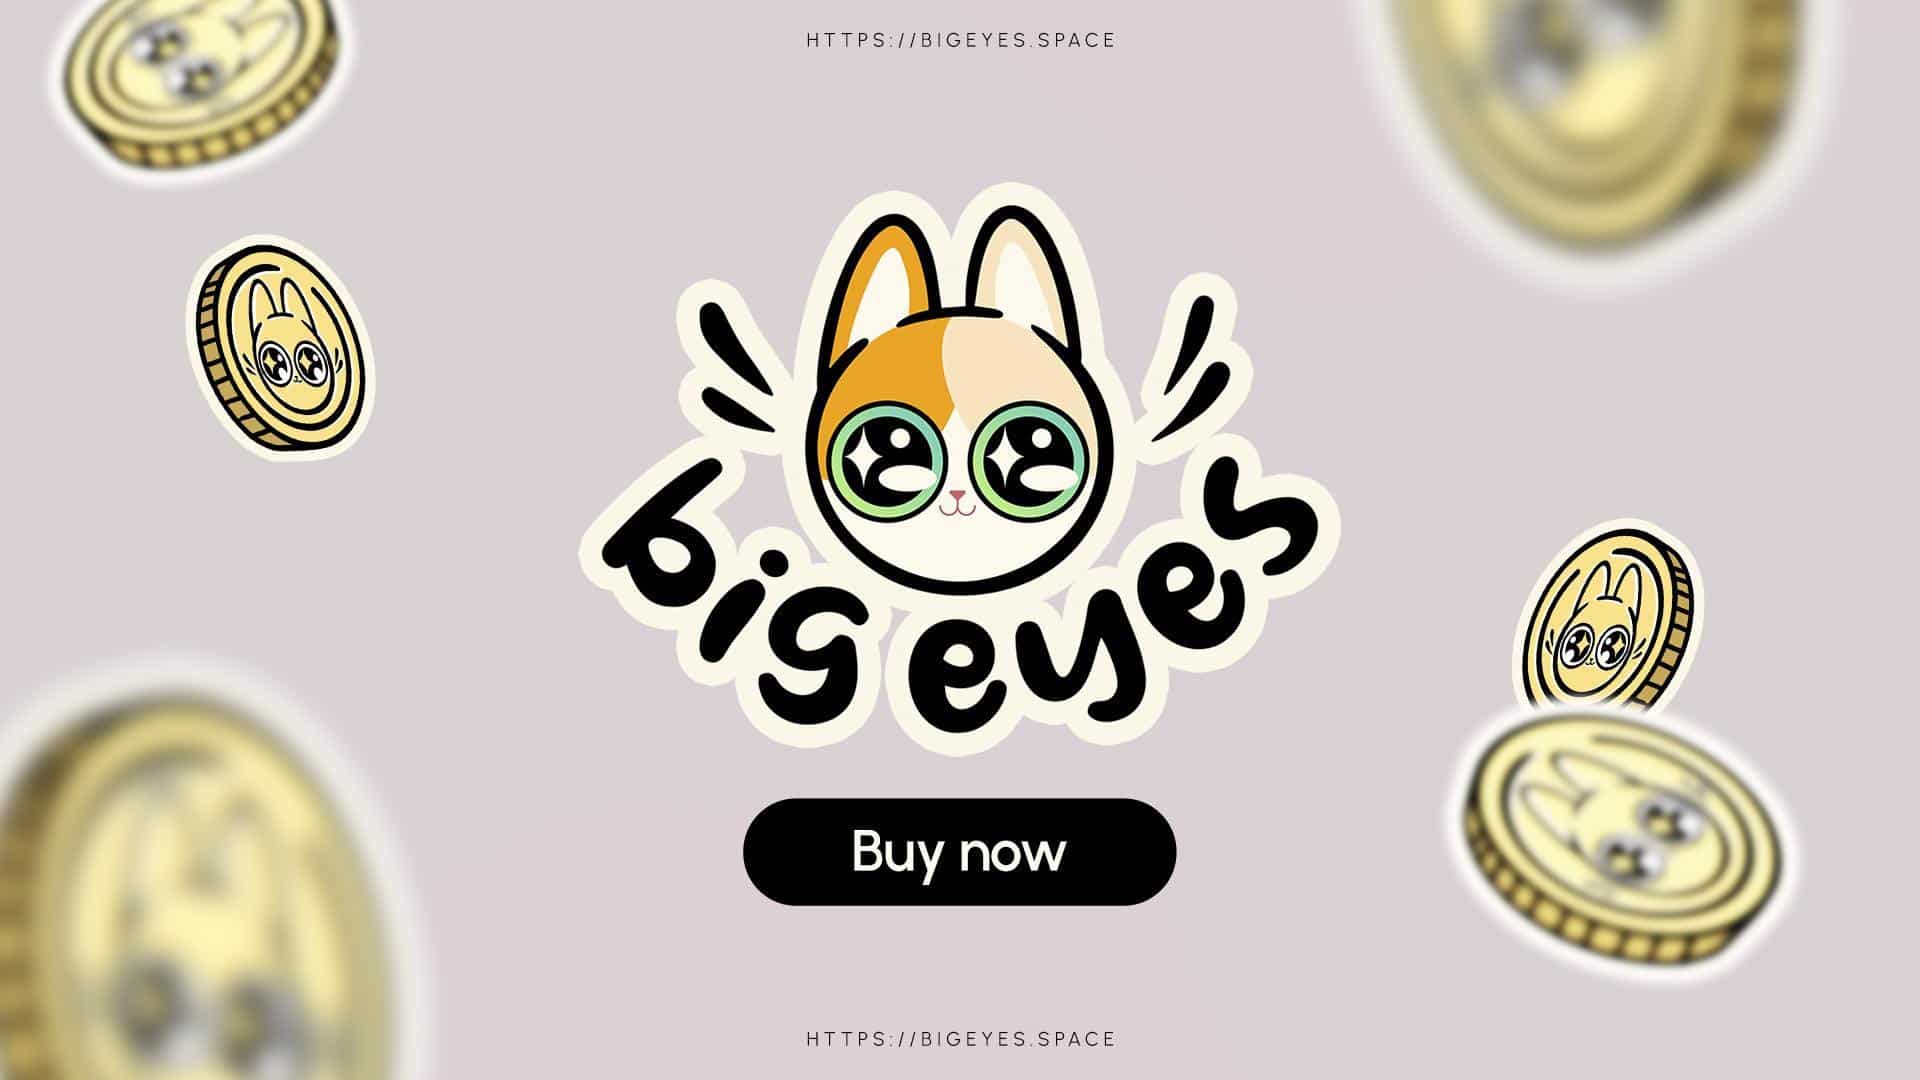 Can Big Eyes Coin Compete with Other Cryptocurrency Giants Like Avalanche and Monero?